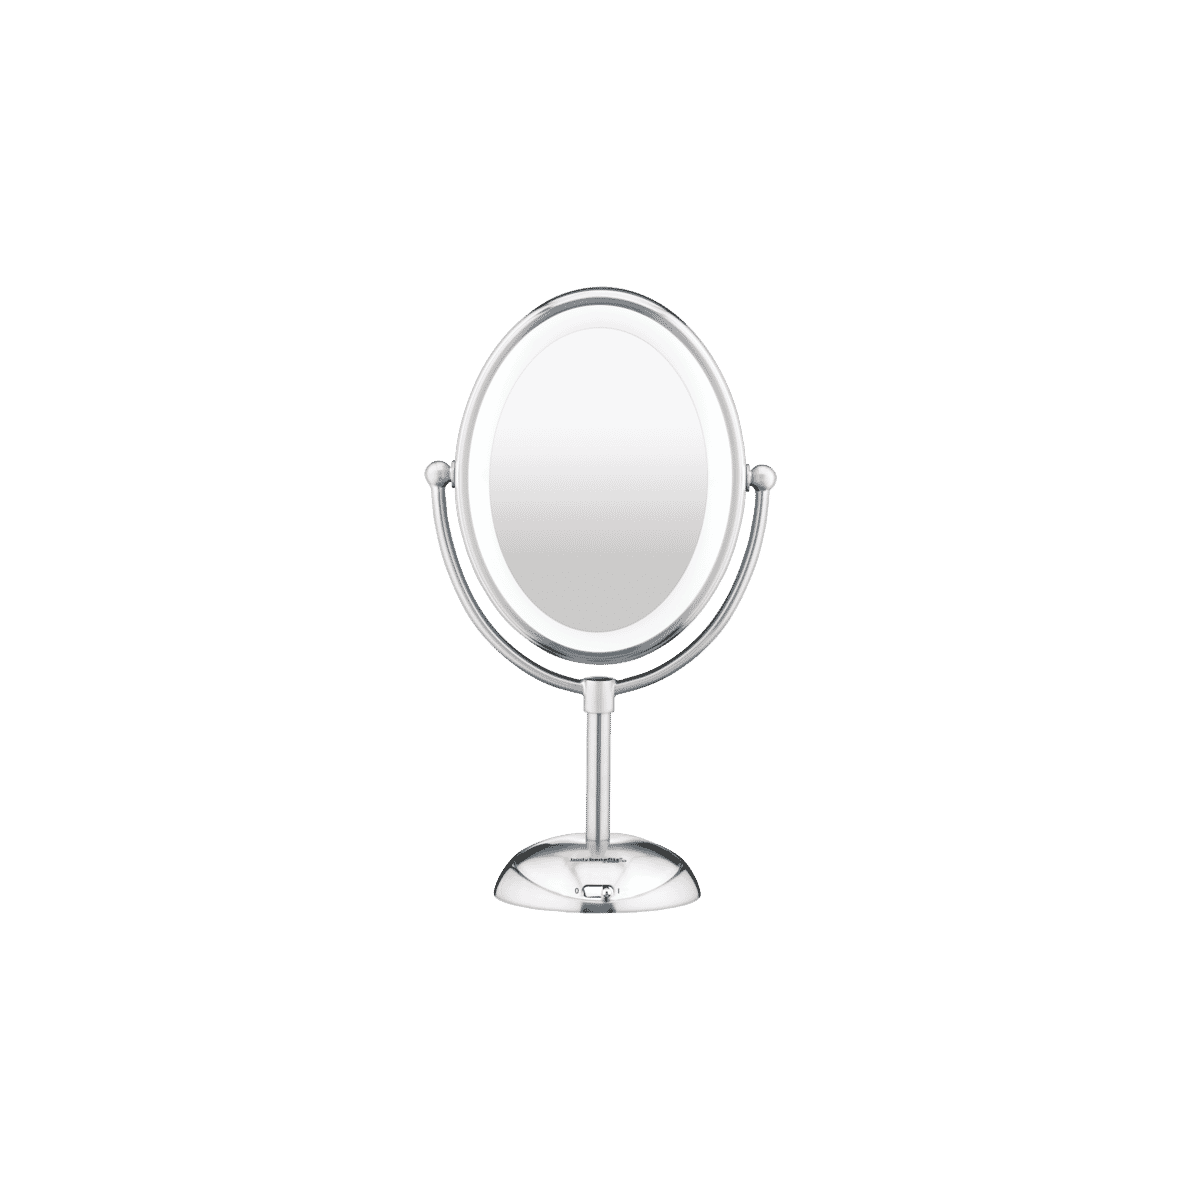 Body Benefits CBE51LCMA Reflections LED Lighted Mirror at The Good Guys